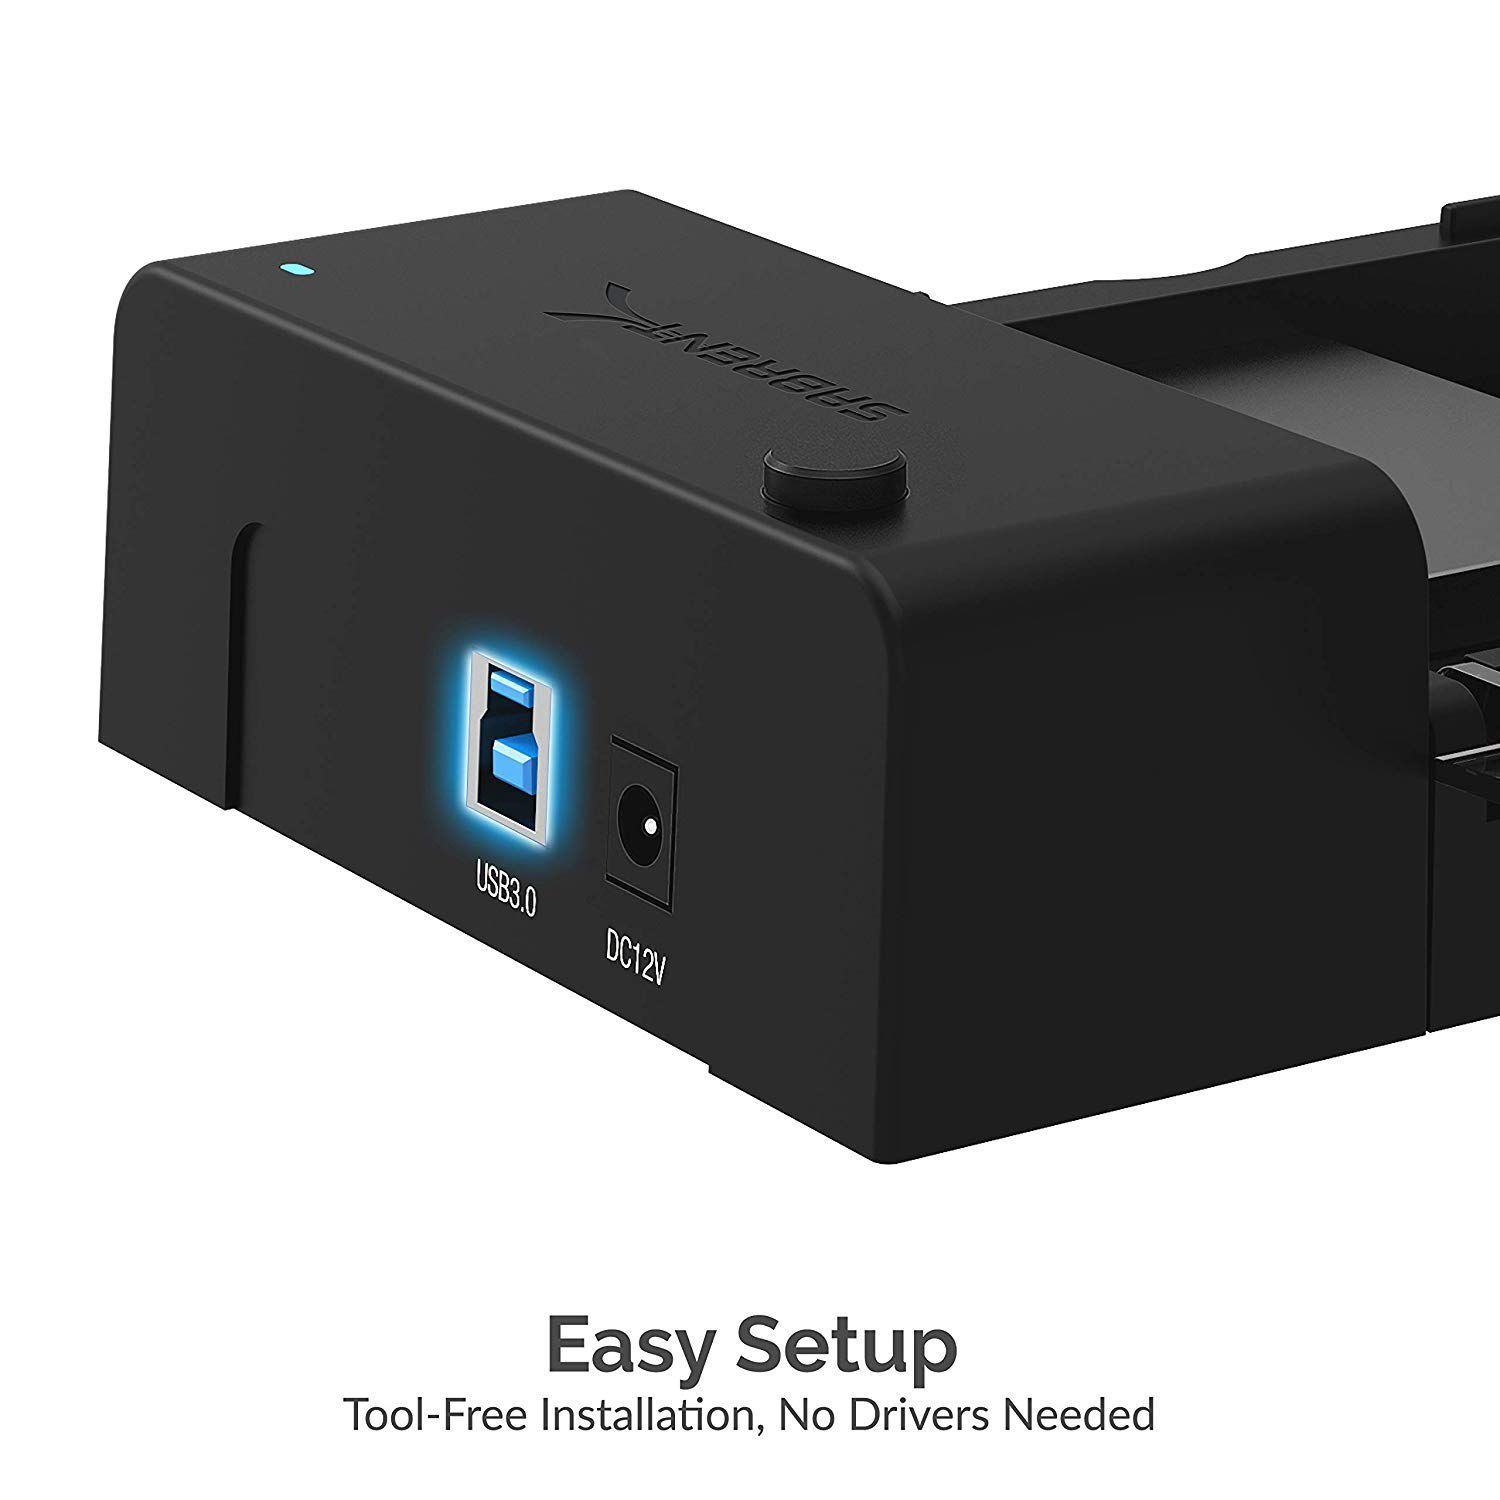 SABRENT USB 3.0 to SATA External Hard Drive Lay-Flat Docking Station for 2.5 or 3.5in HDD, SSD [Support UASP] (EC-DFLT)